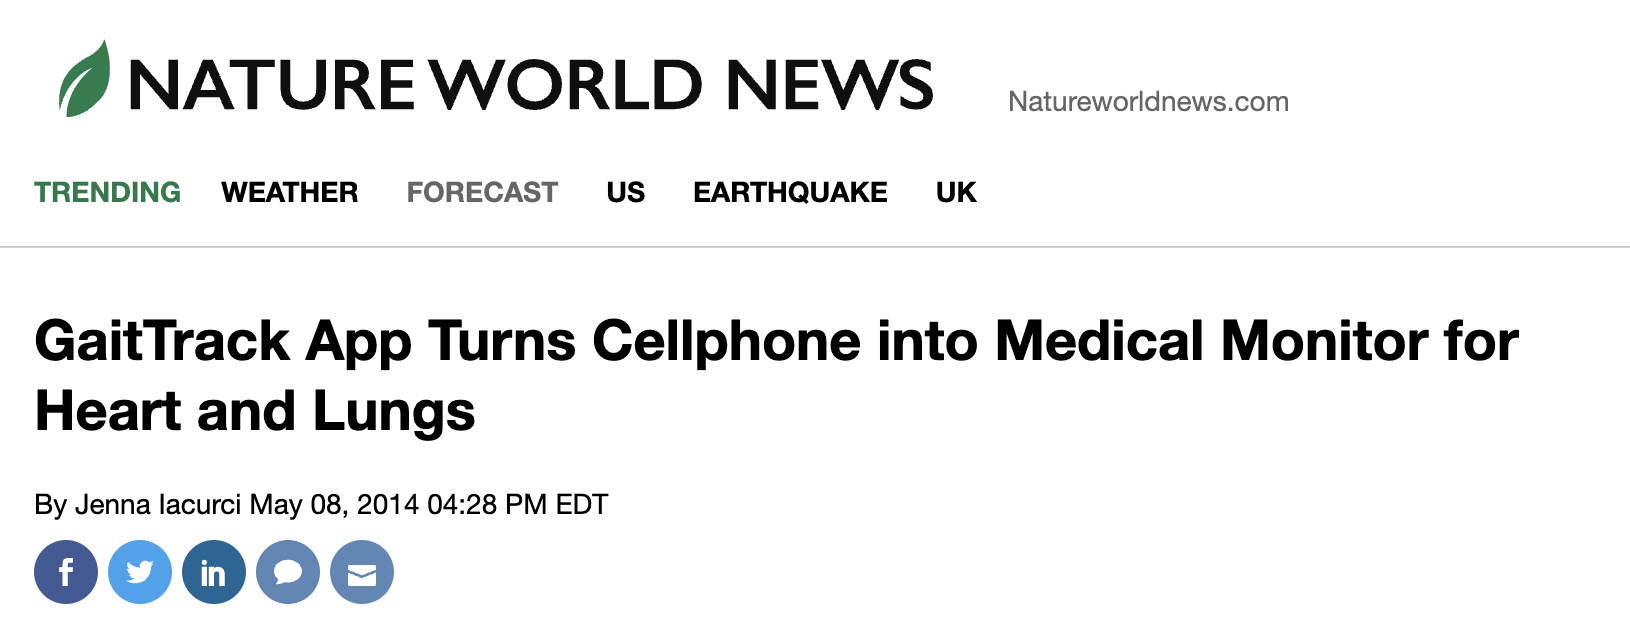 GaitTrack app makes cellphone a medical monitor for heart and lung patients, Nature World News